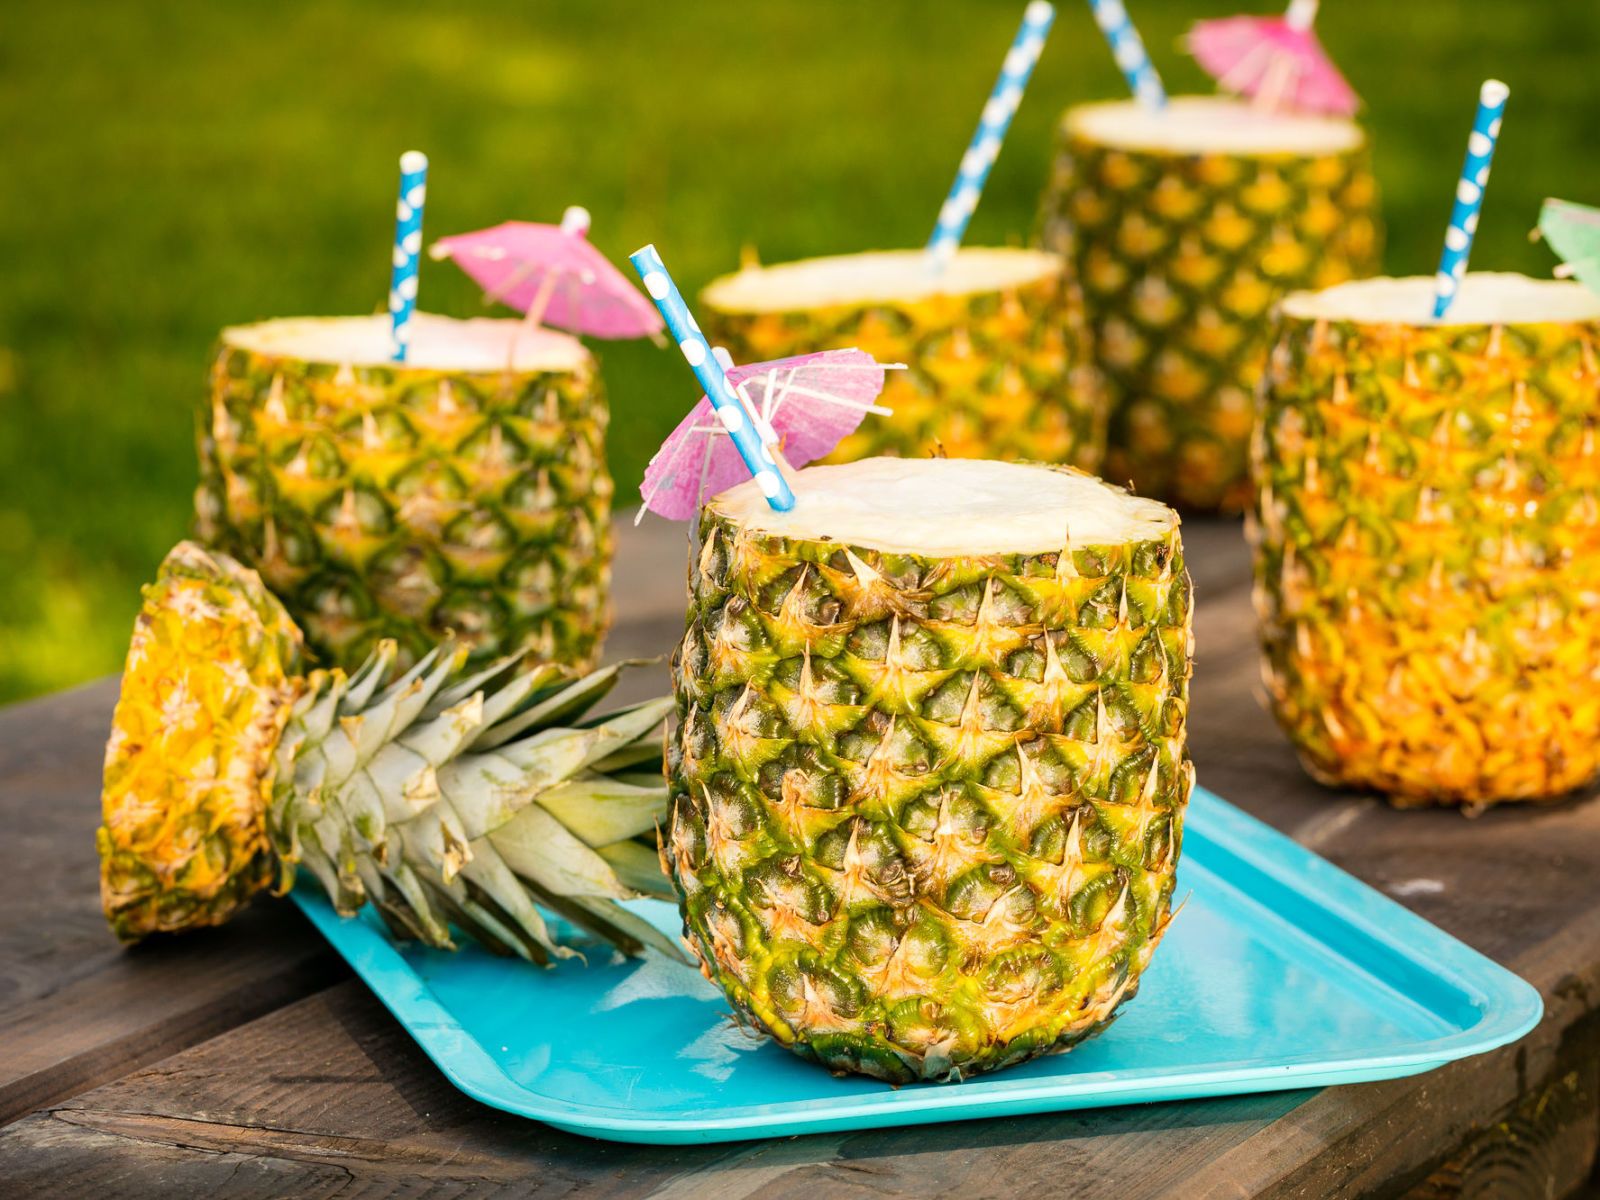 how-to-carve-a-pineapple-into-a-cup-without-a-corer